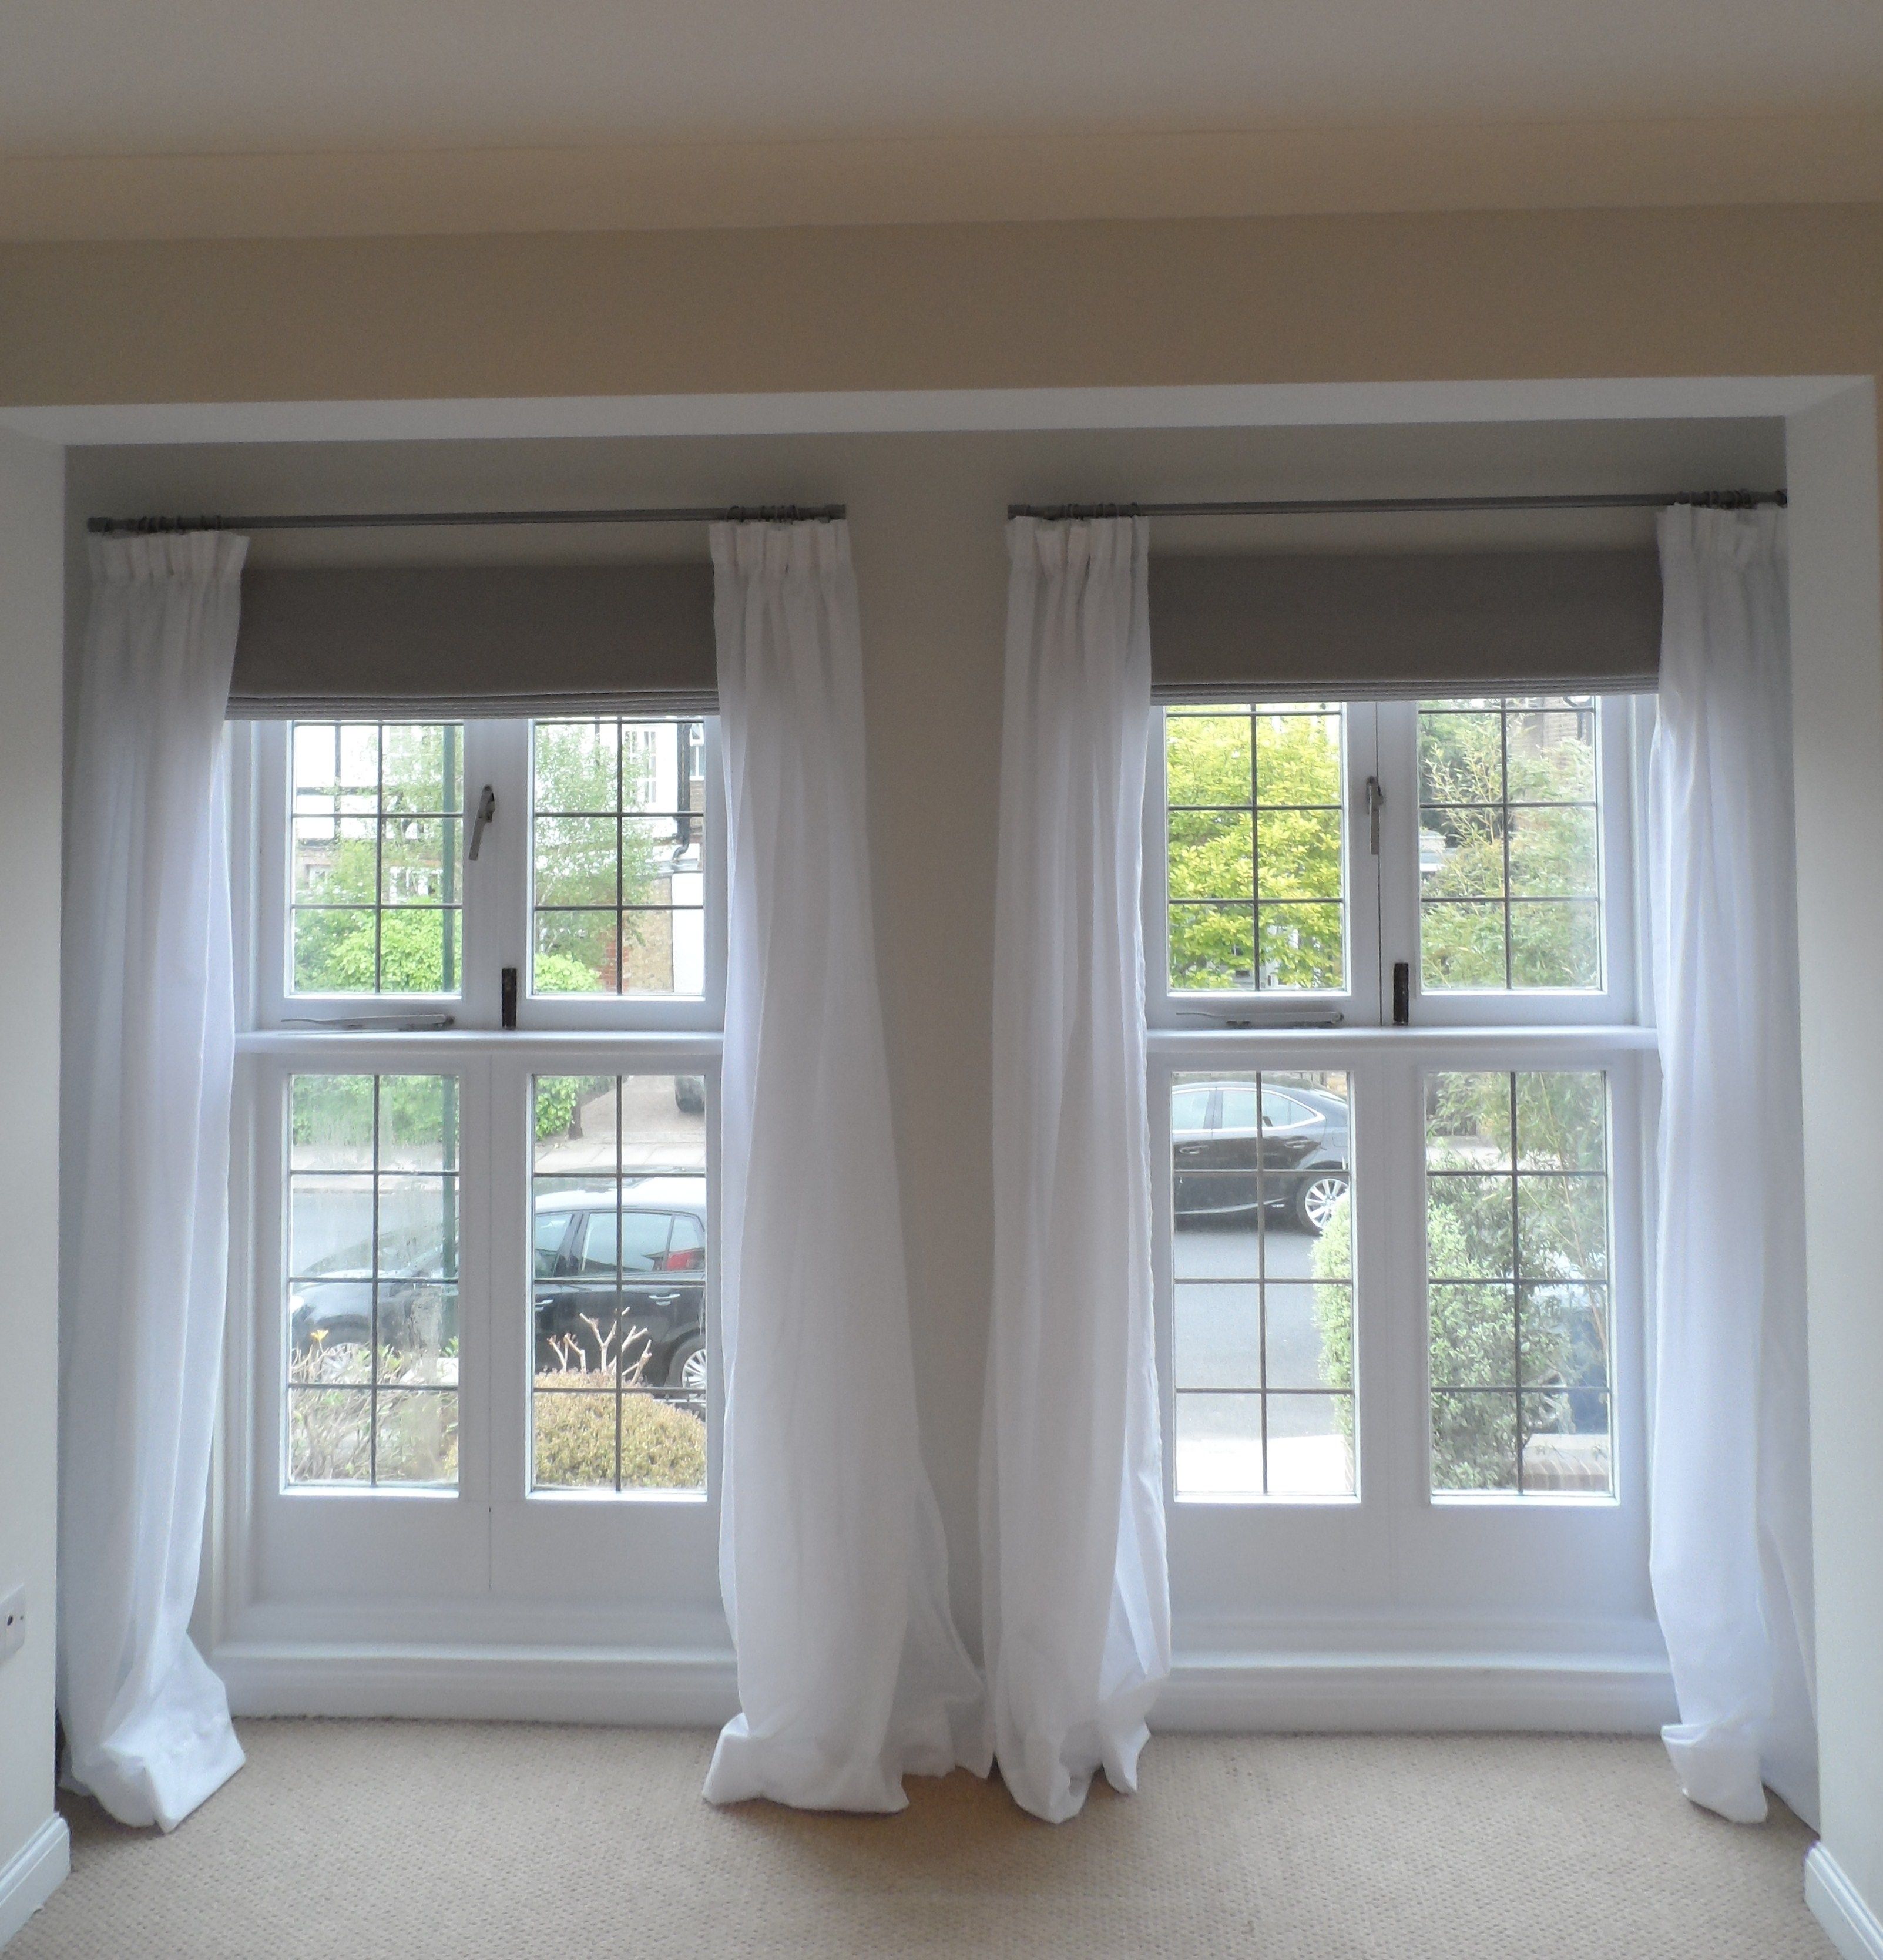 Handmade Interlined Roman Blinds And Overlong Sheer Curtains On For Handmade Roman Blinds (View 13 of 15)